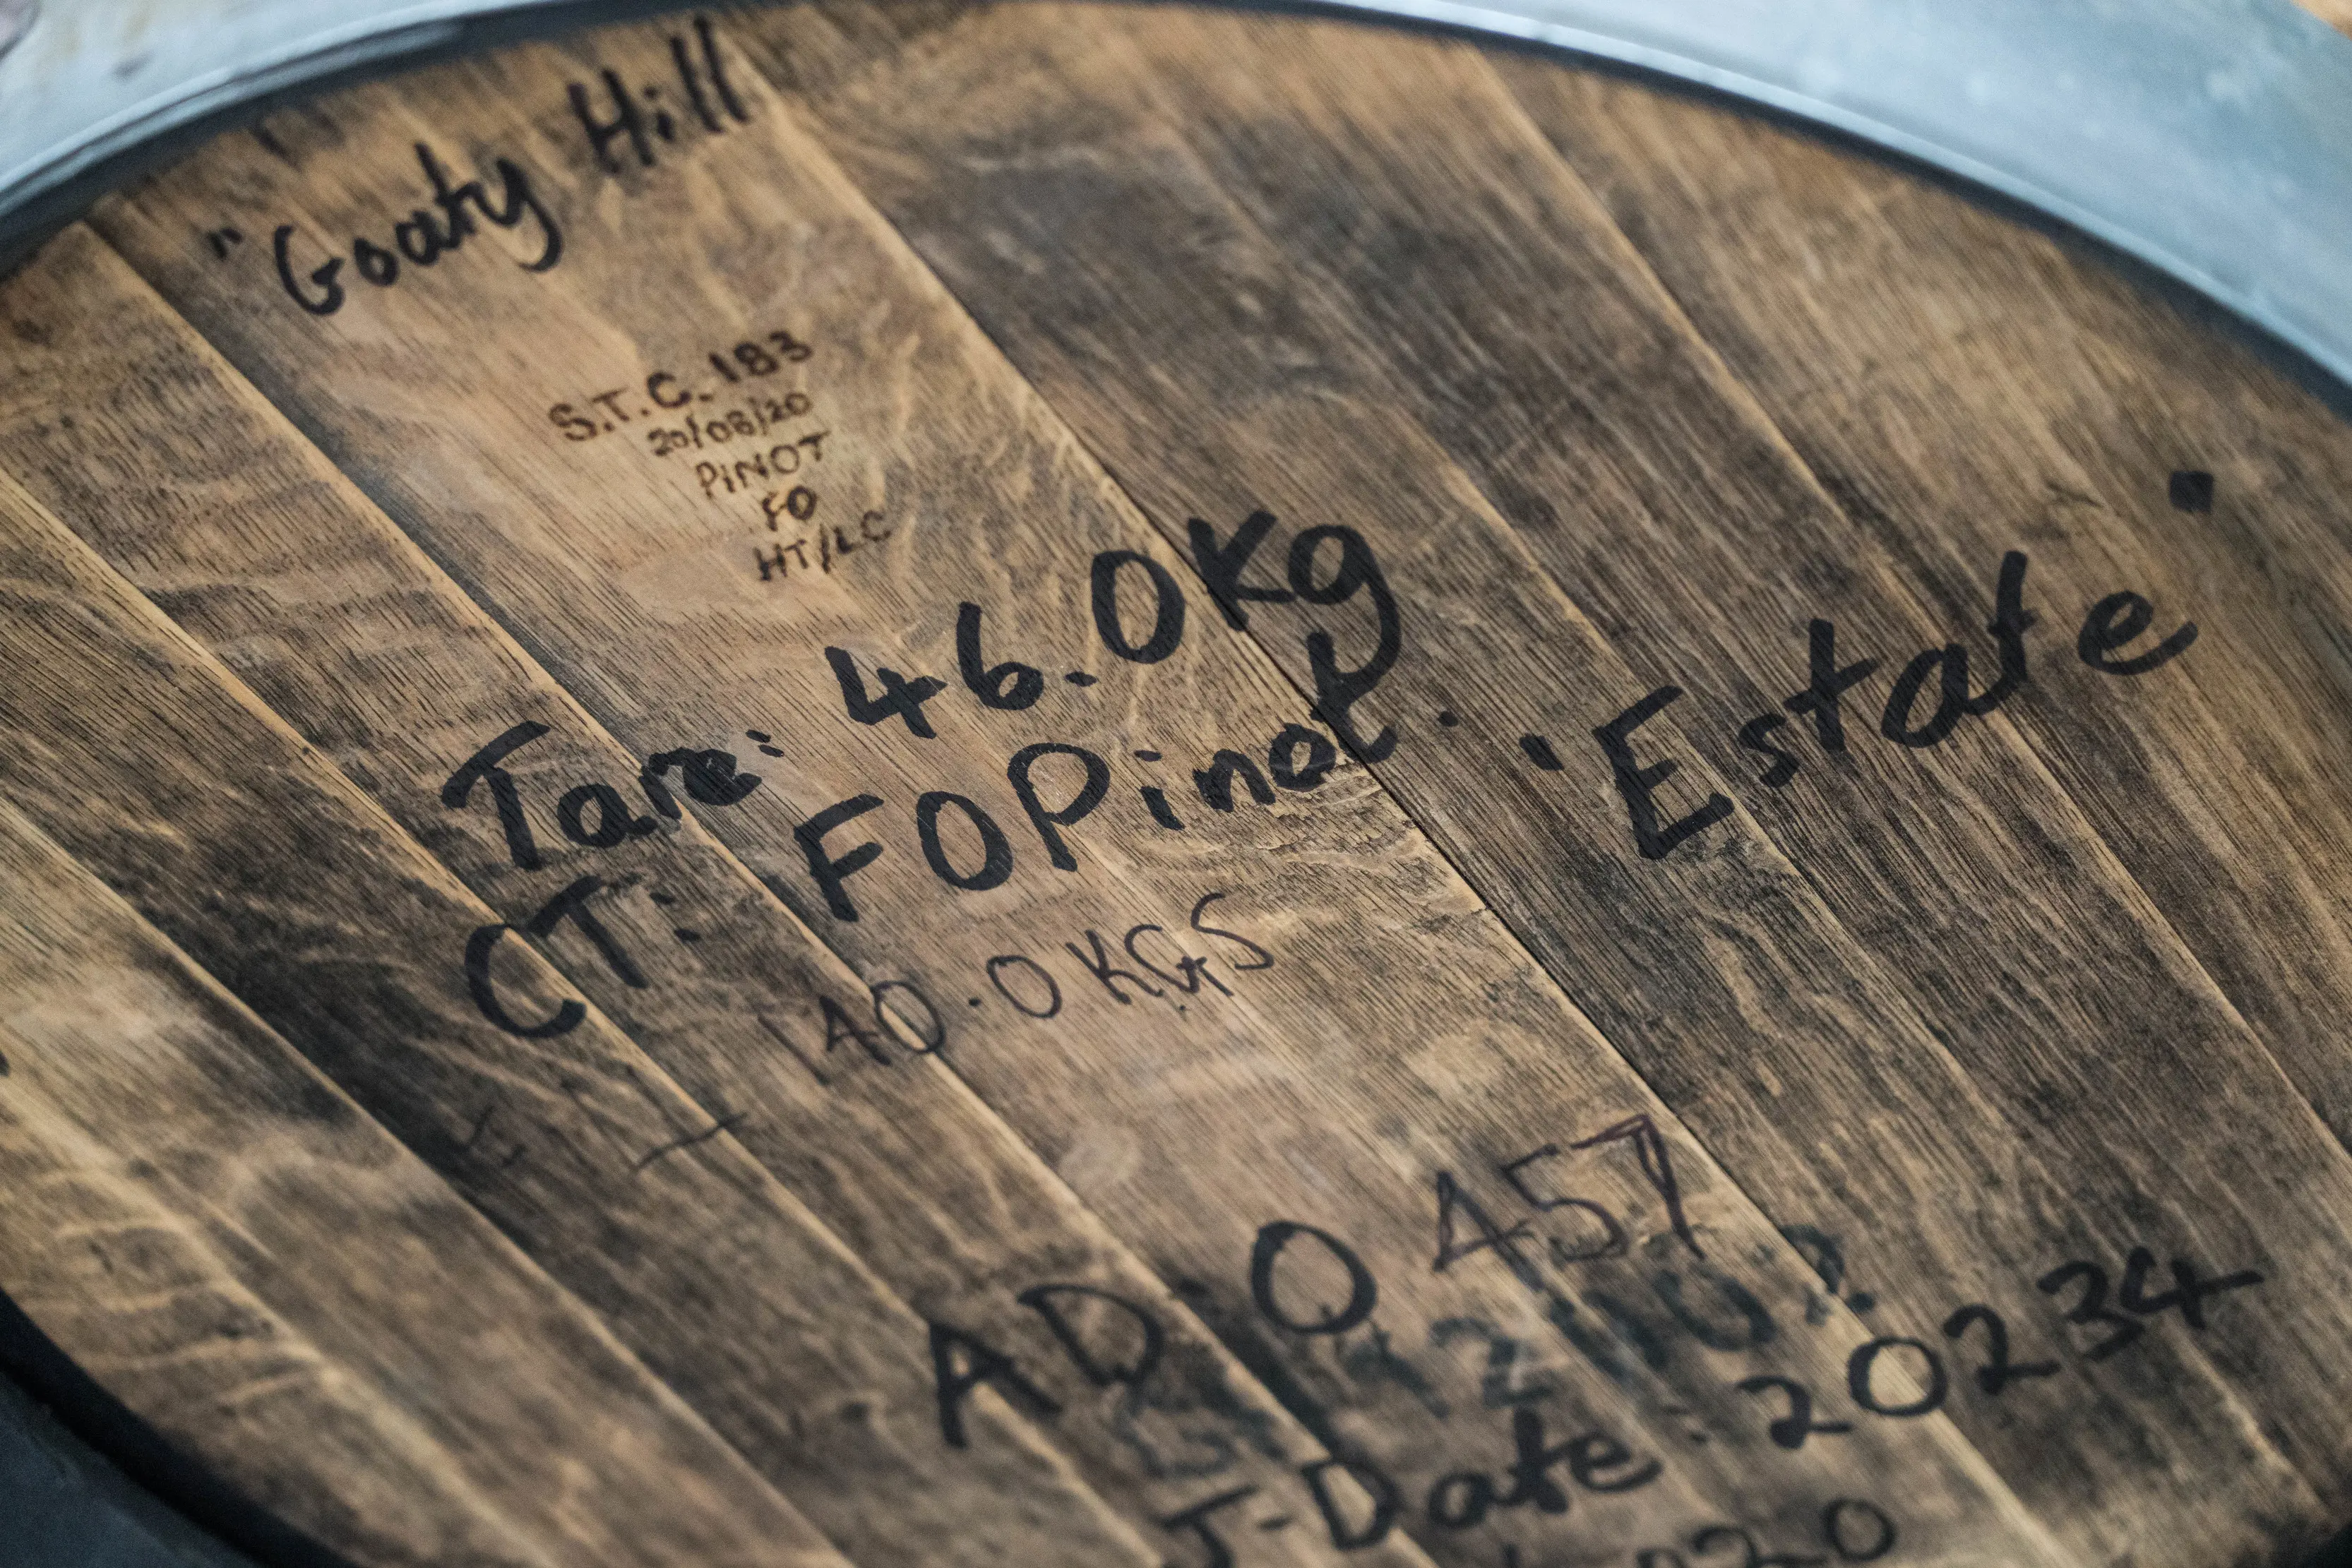 Product information include weights and dates are noted on a barrel at Adams Distillery.